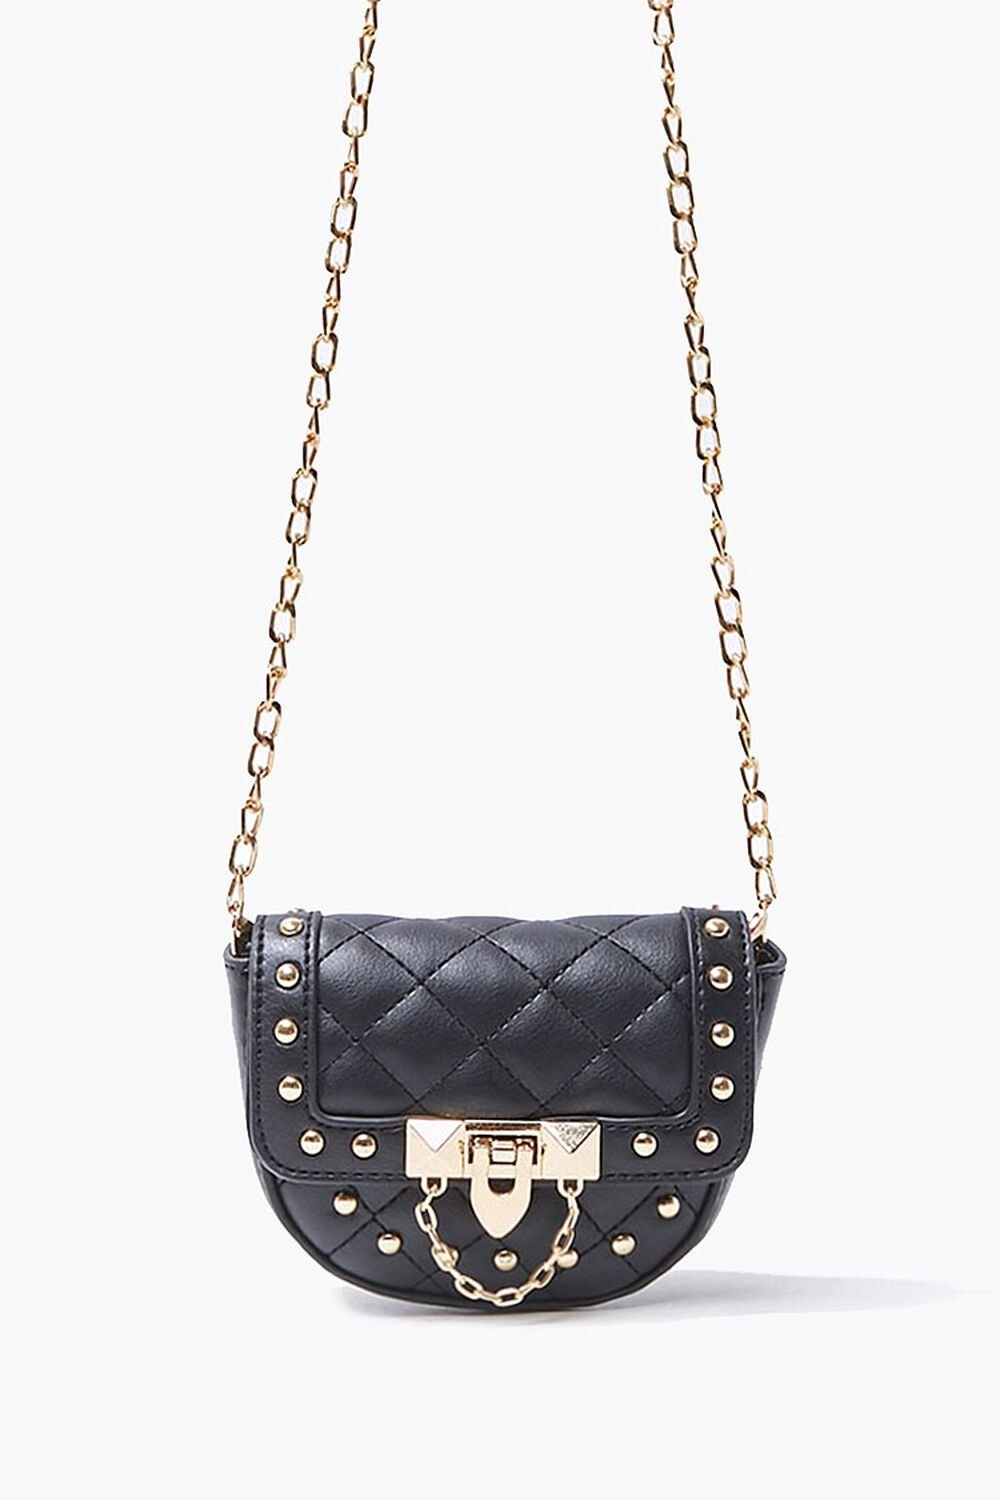 BLACK Studded Quilted Crossbody Bag, image 1